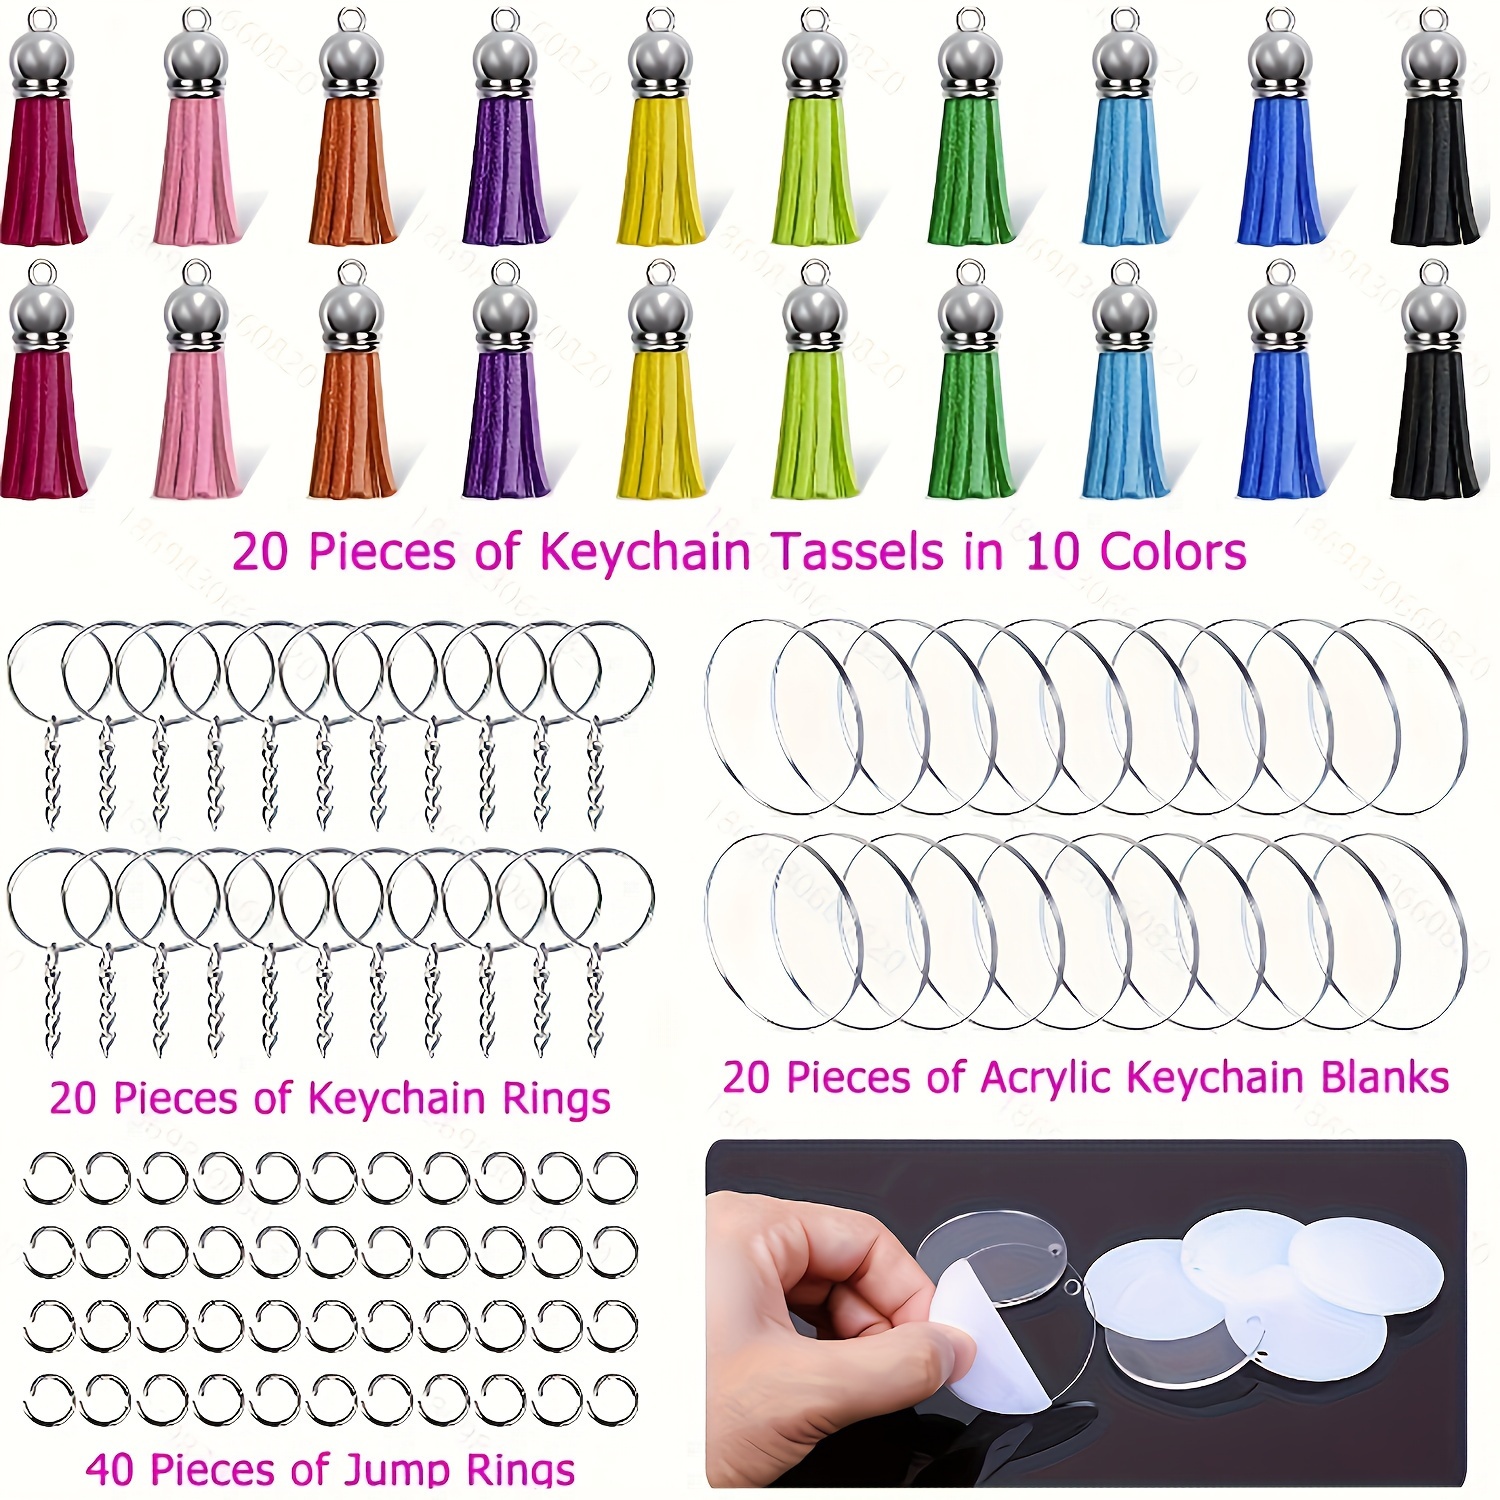 Acrylic Keychain Blanks for Key Rings Woven Keychains for DIY